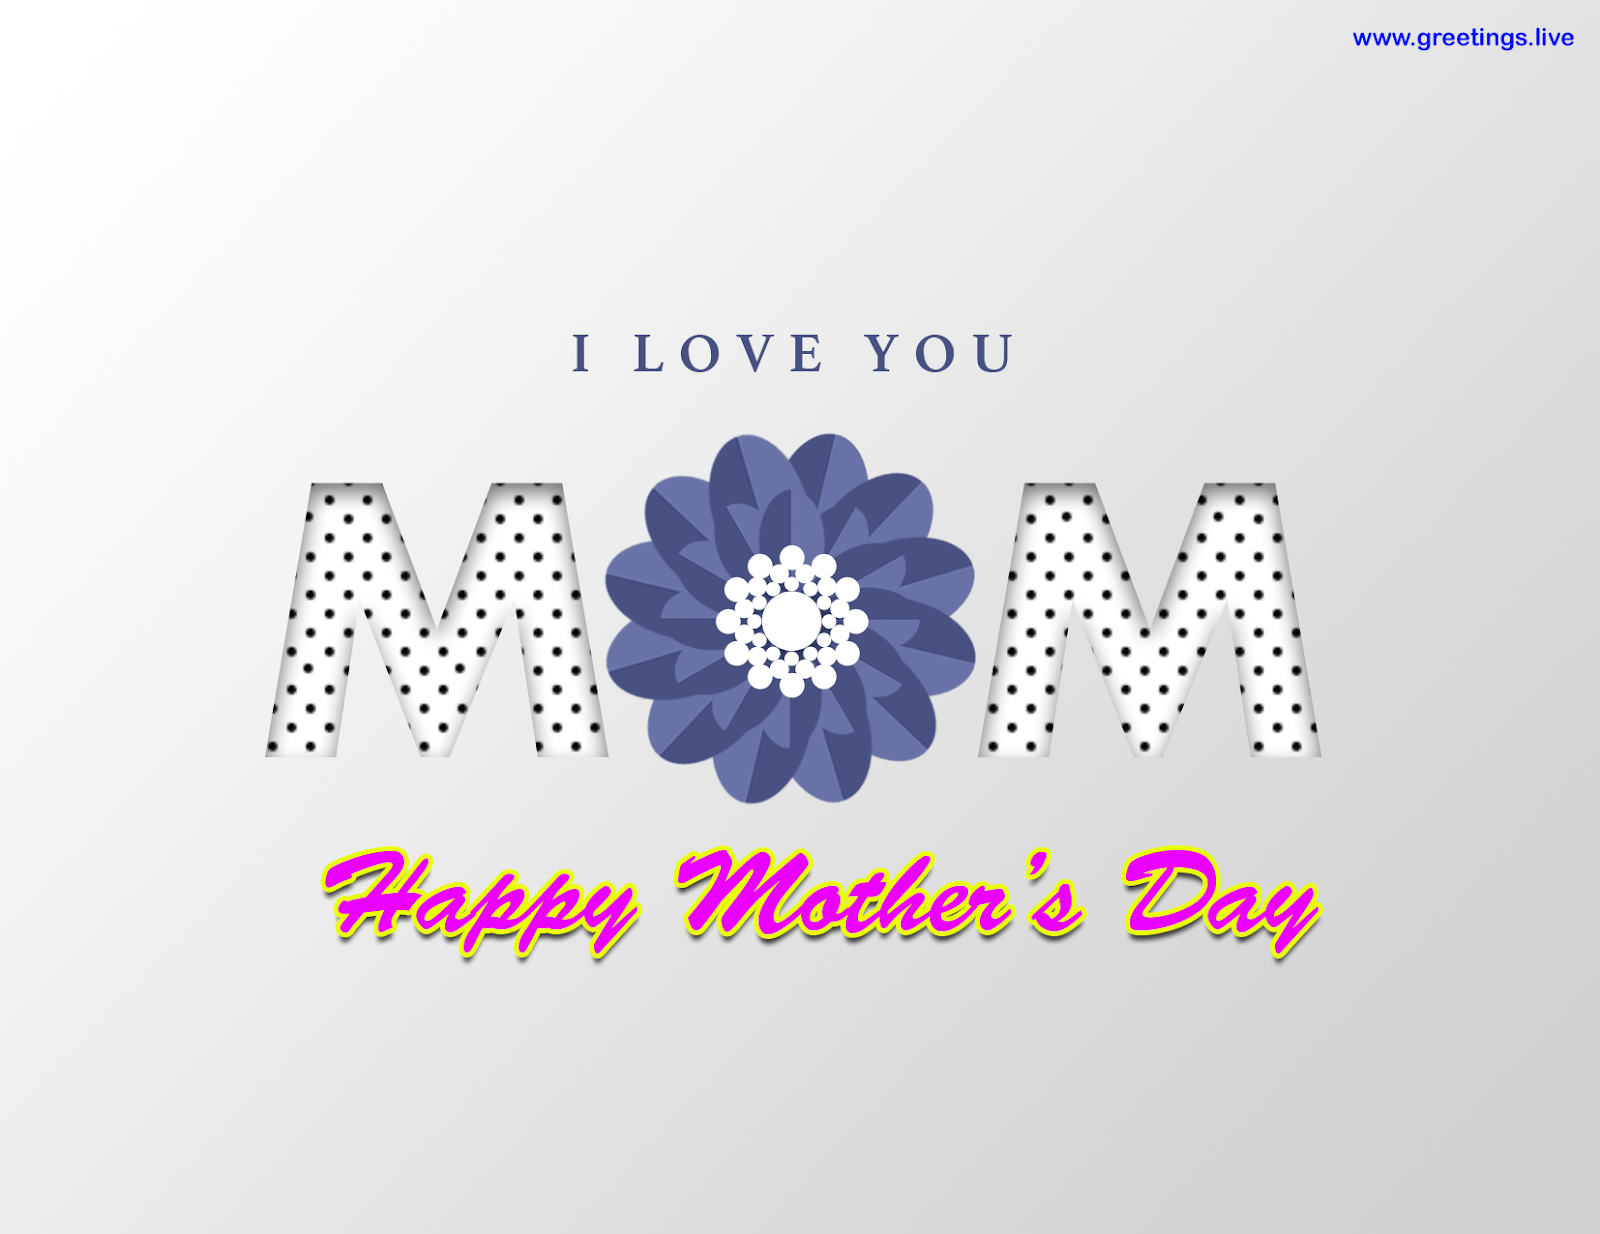 Greetings Live Free Daily Greetings Pictures Festival Gif Images I Love You Mom Mothers Day Greetings